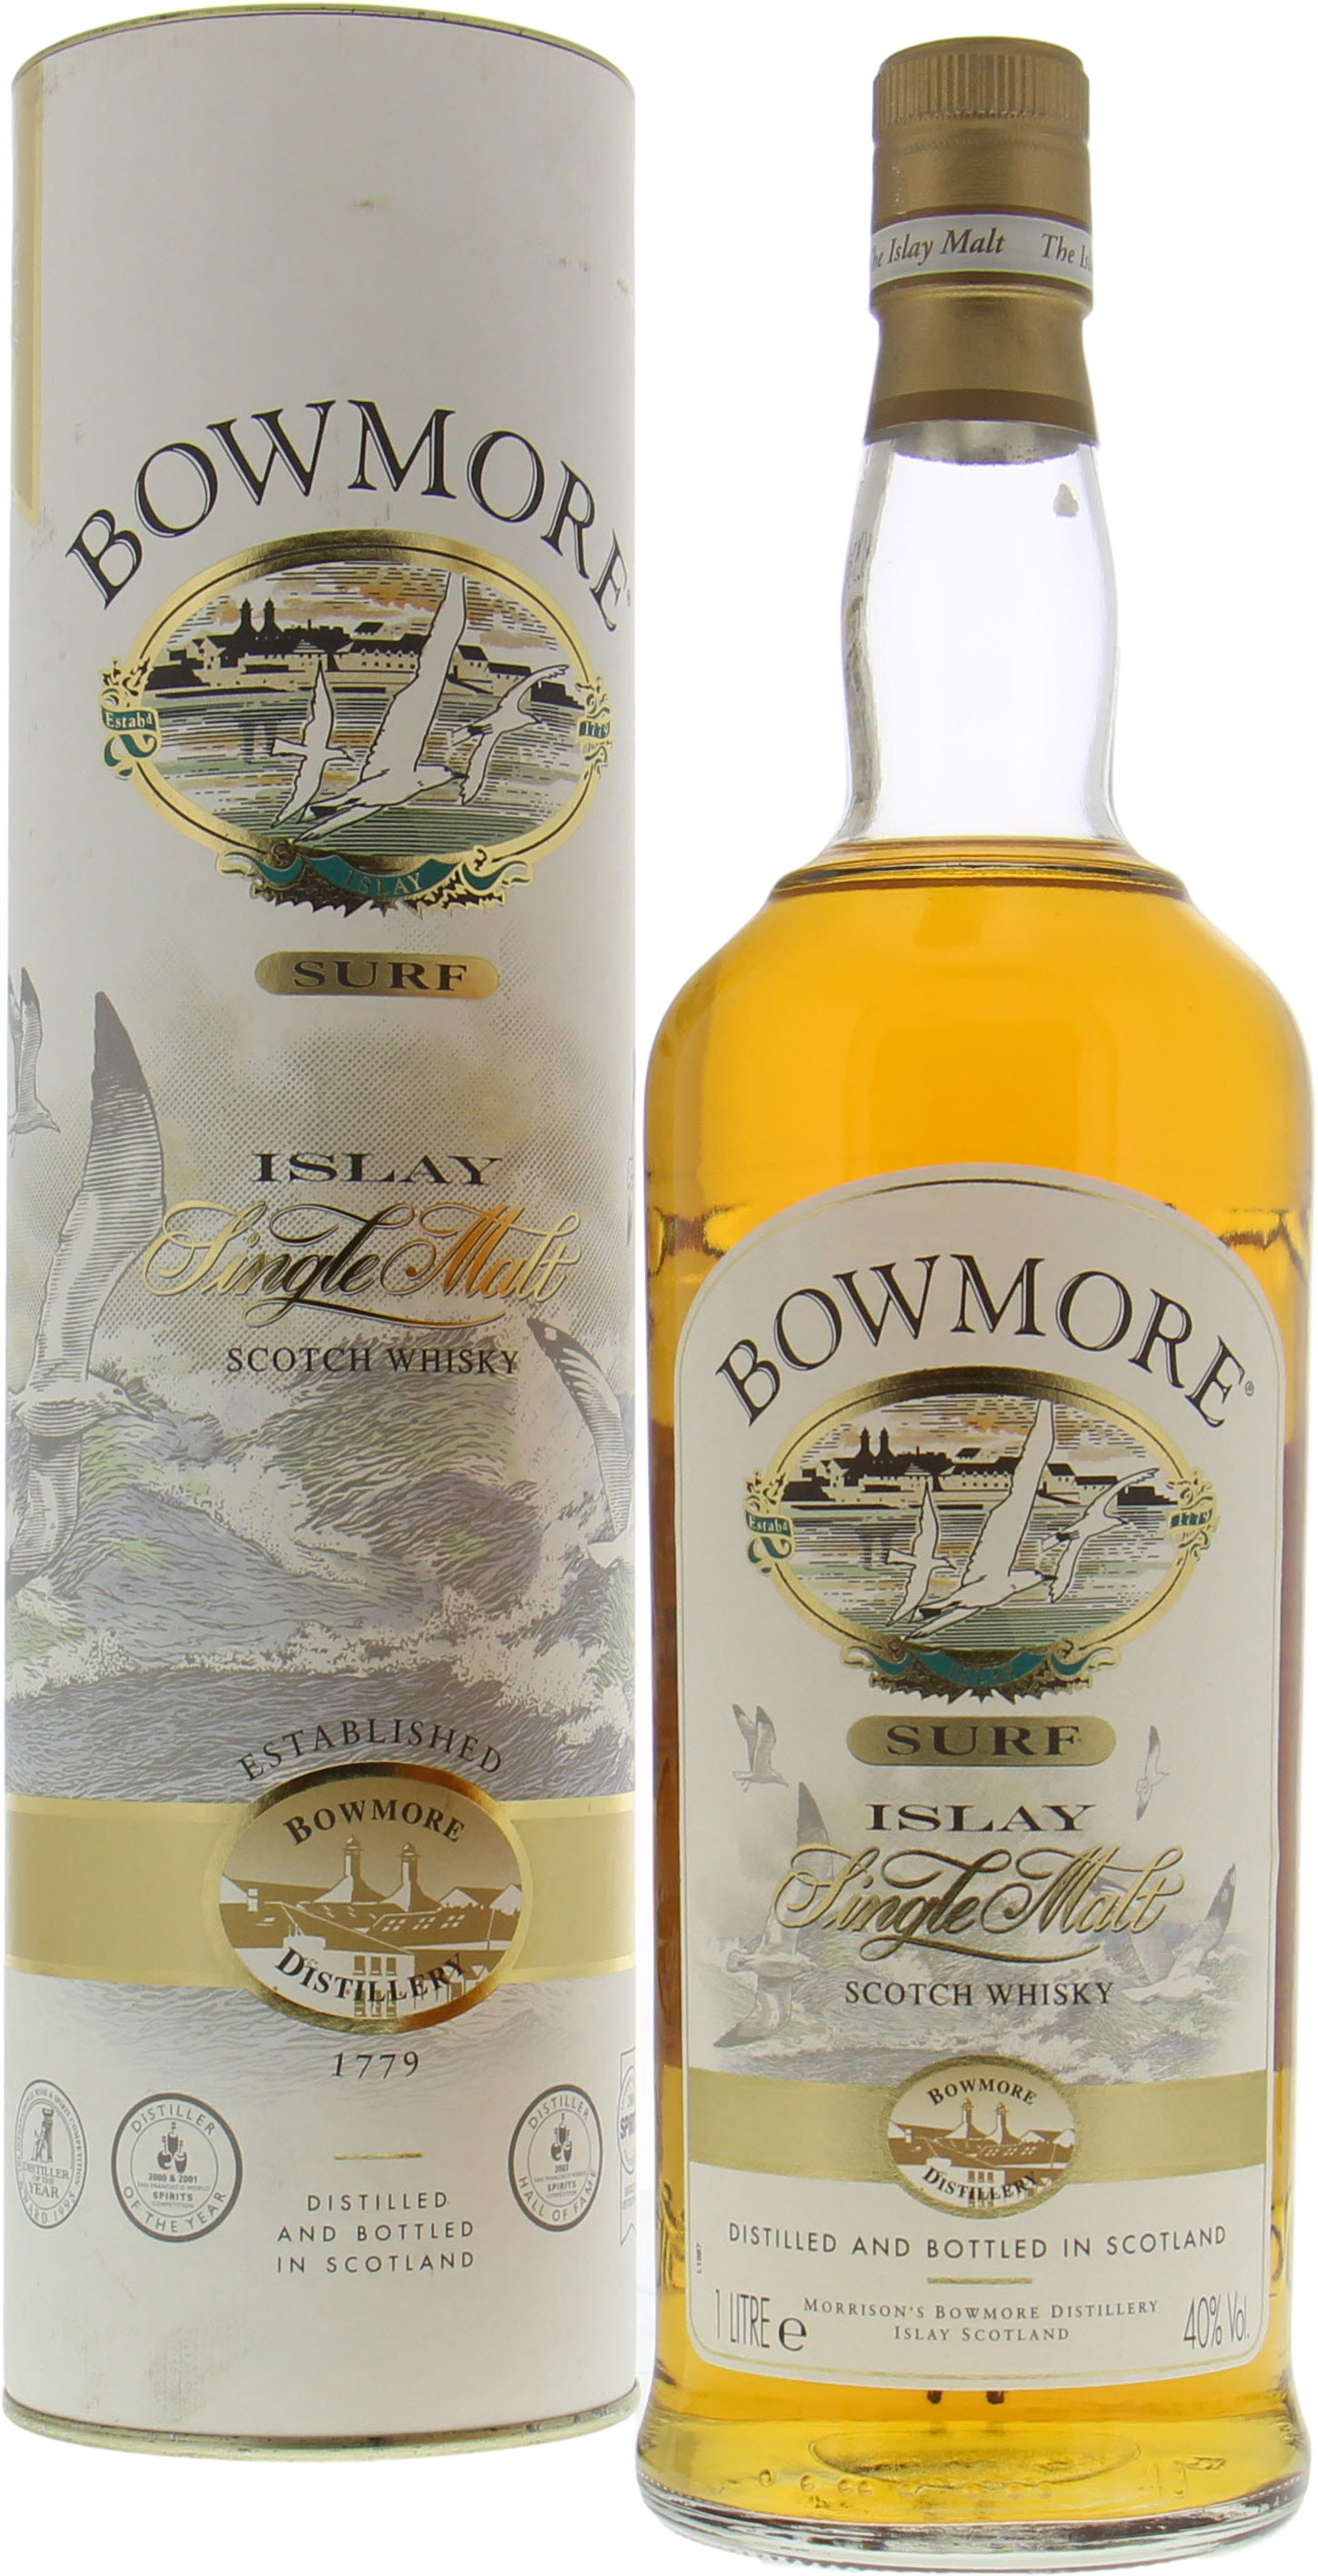 Bowmore - Surf Golden label with small distillery image 40% NV IN Original Container